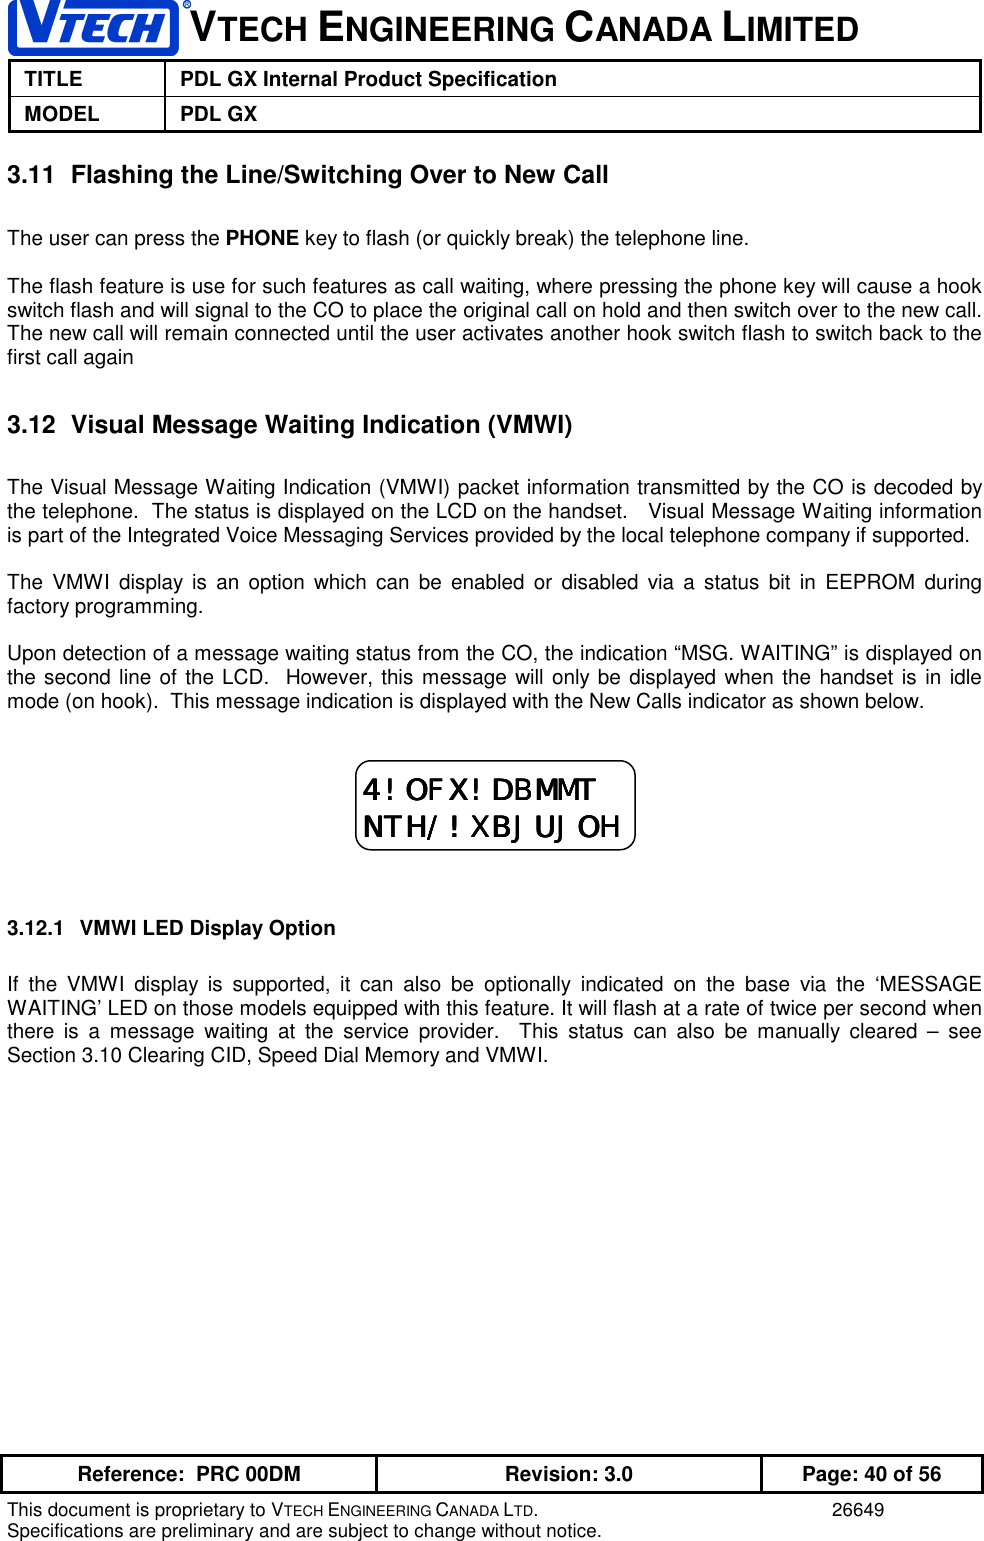 VTECH ENGINEERING CANADA LIMITEDTITLE PDL GX Internal Product SpecificationMODEL PDL GXReference:  PRC 00DM Revision: 3.0 Page: 40 of 56This document is proprietary to VTECH ENGINEERING CANADA LTD. 26649Specifications are preliminary and are subject to change without notice.3.11  Flashing the Line/Switching Over to New CallThe user can press the PHONE key to flash (or quickly break) the telephone line.The flash feature is use for such features as call waiting, where pressing the phone key will cause a hookswitch flash and will signal to the CO to place the original call on hold and then switch over to the new call.The new call will remain connected until the user activates another hook switch flash to switch back to thefirst call again3.12  Visual Message Waiting Indication (VMWI)The Visual Message Waiting Indication (VMWI) packet information transmitted by the CO is decoded bythe telephone.  The status is displayed on the LCD on the handset.   Visual Message Waiting informationis part of the Integrated Voice Messaging Services provided by the local telephone company if supported.The VMWI display is an option which can be enabled or disabled via a status bit in EEPROM duringfactory programming.Upon detection of a message waiting status from the CO, the indication “MSG. WAITING” is displayed onthe second line of the LCD.  However, this message will only be displayed when the handset is in idlemode (on hook).  This message indication is displayed with the New Calls indicator as shown below.3.12.1  VMWI LED Display OptionIf the VMWI display is supported, it can also be optionally indicated on the base via the ‘MESSAGEWAITING’ LED on those models equipped with this feature. It will flash at a rate of twice per second whenthere is a message waiting at the service provider.  This status can also be manually cleared – seeSection 3.10 Clearing CID, Speed Dial Memory and VMWI.4!OFX!DBMMT4!OFX!DBMMT4!OFX!DBMMT4!OFX!DBMMTNTH/!XBJUJOHNTH/!XBJUJOHNTH/!XBJUJOHNTH/!XBJUJOH